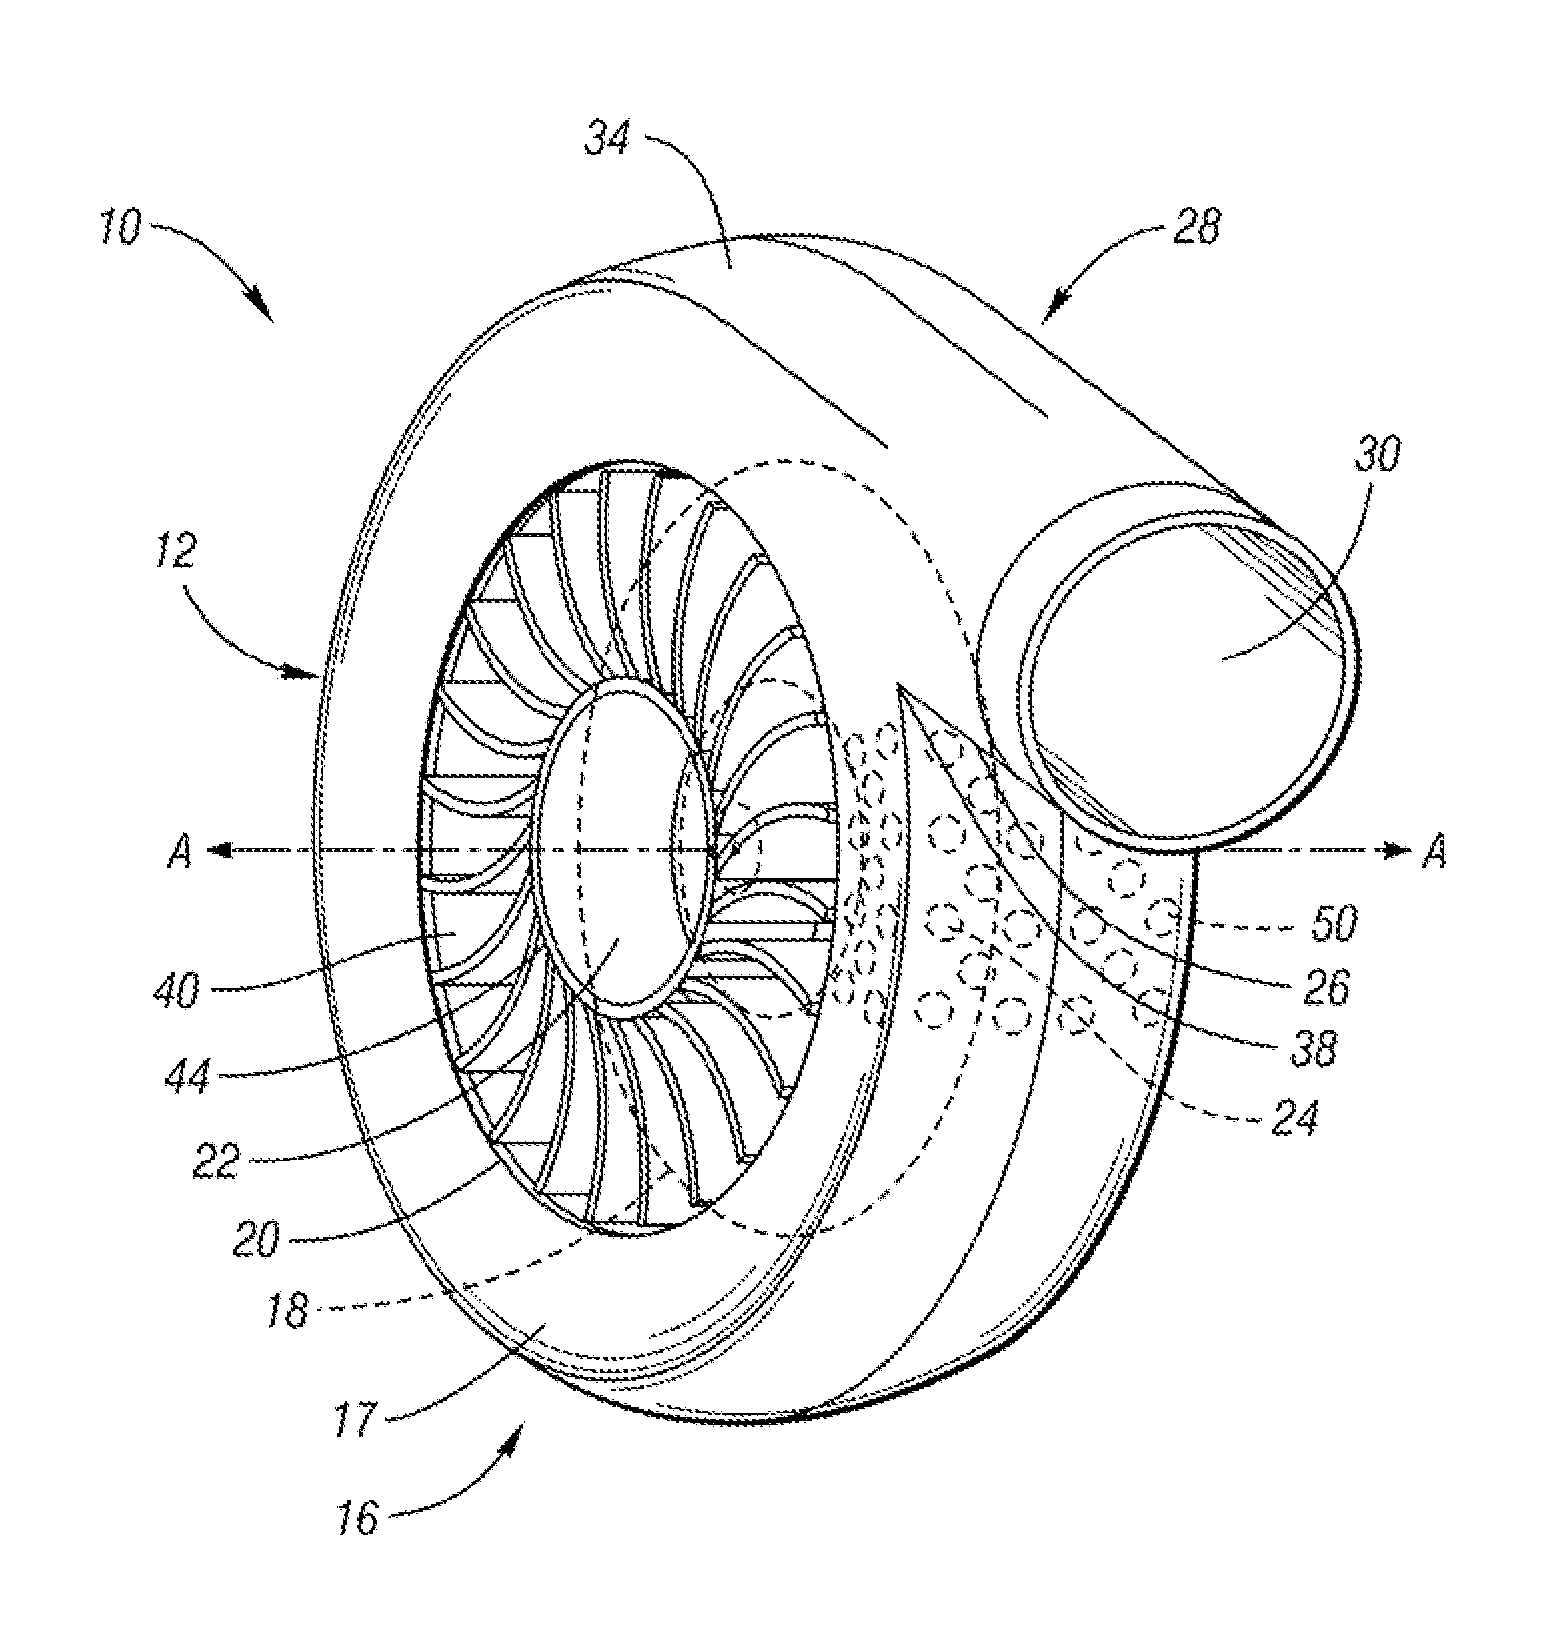 Reduction of flow-induced noise in a centrifugal blower